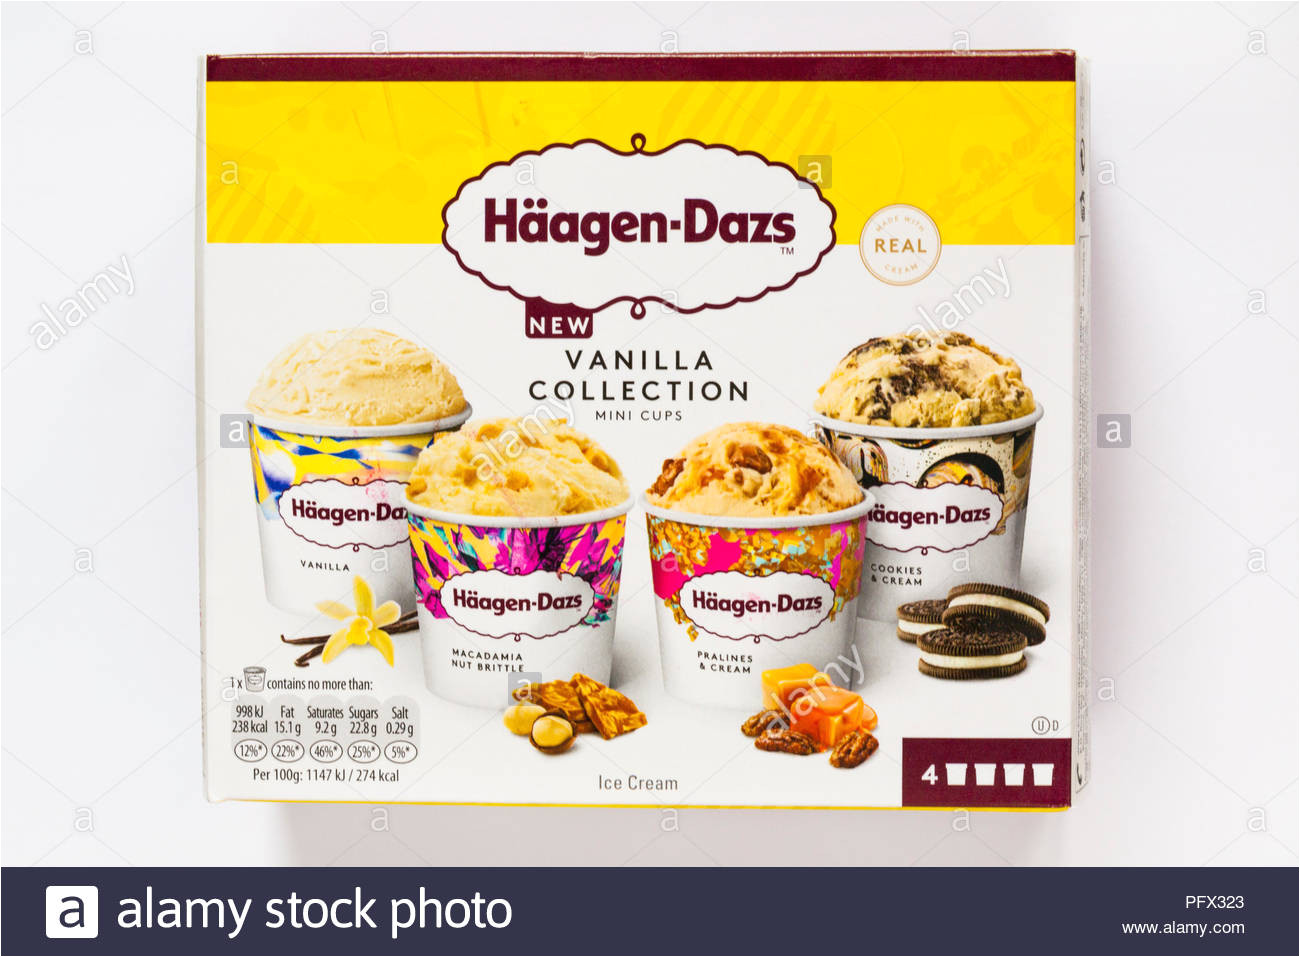 box of haagen dazs new vanilla collection mini cups isolated on white background stock